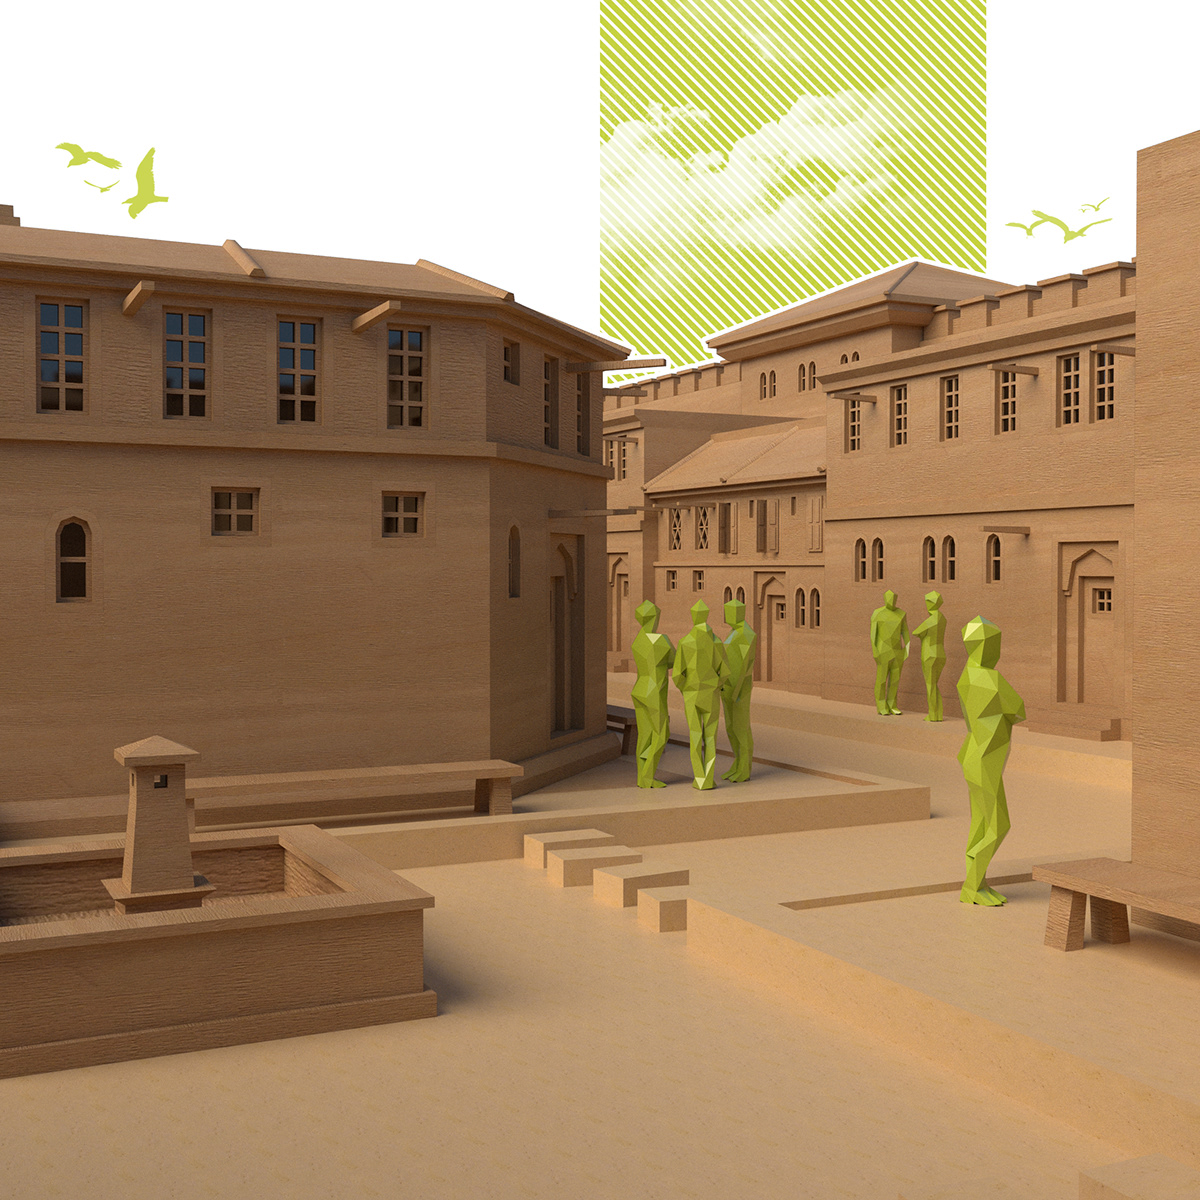 3dmodelling   architecture lowpoly photoshop Render roman SketchUP towns vray